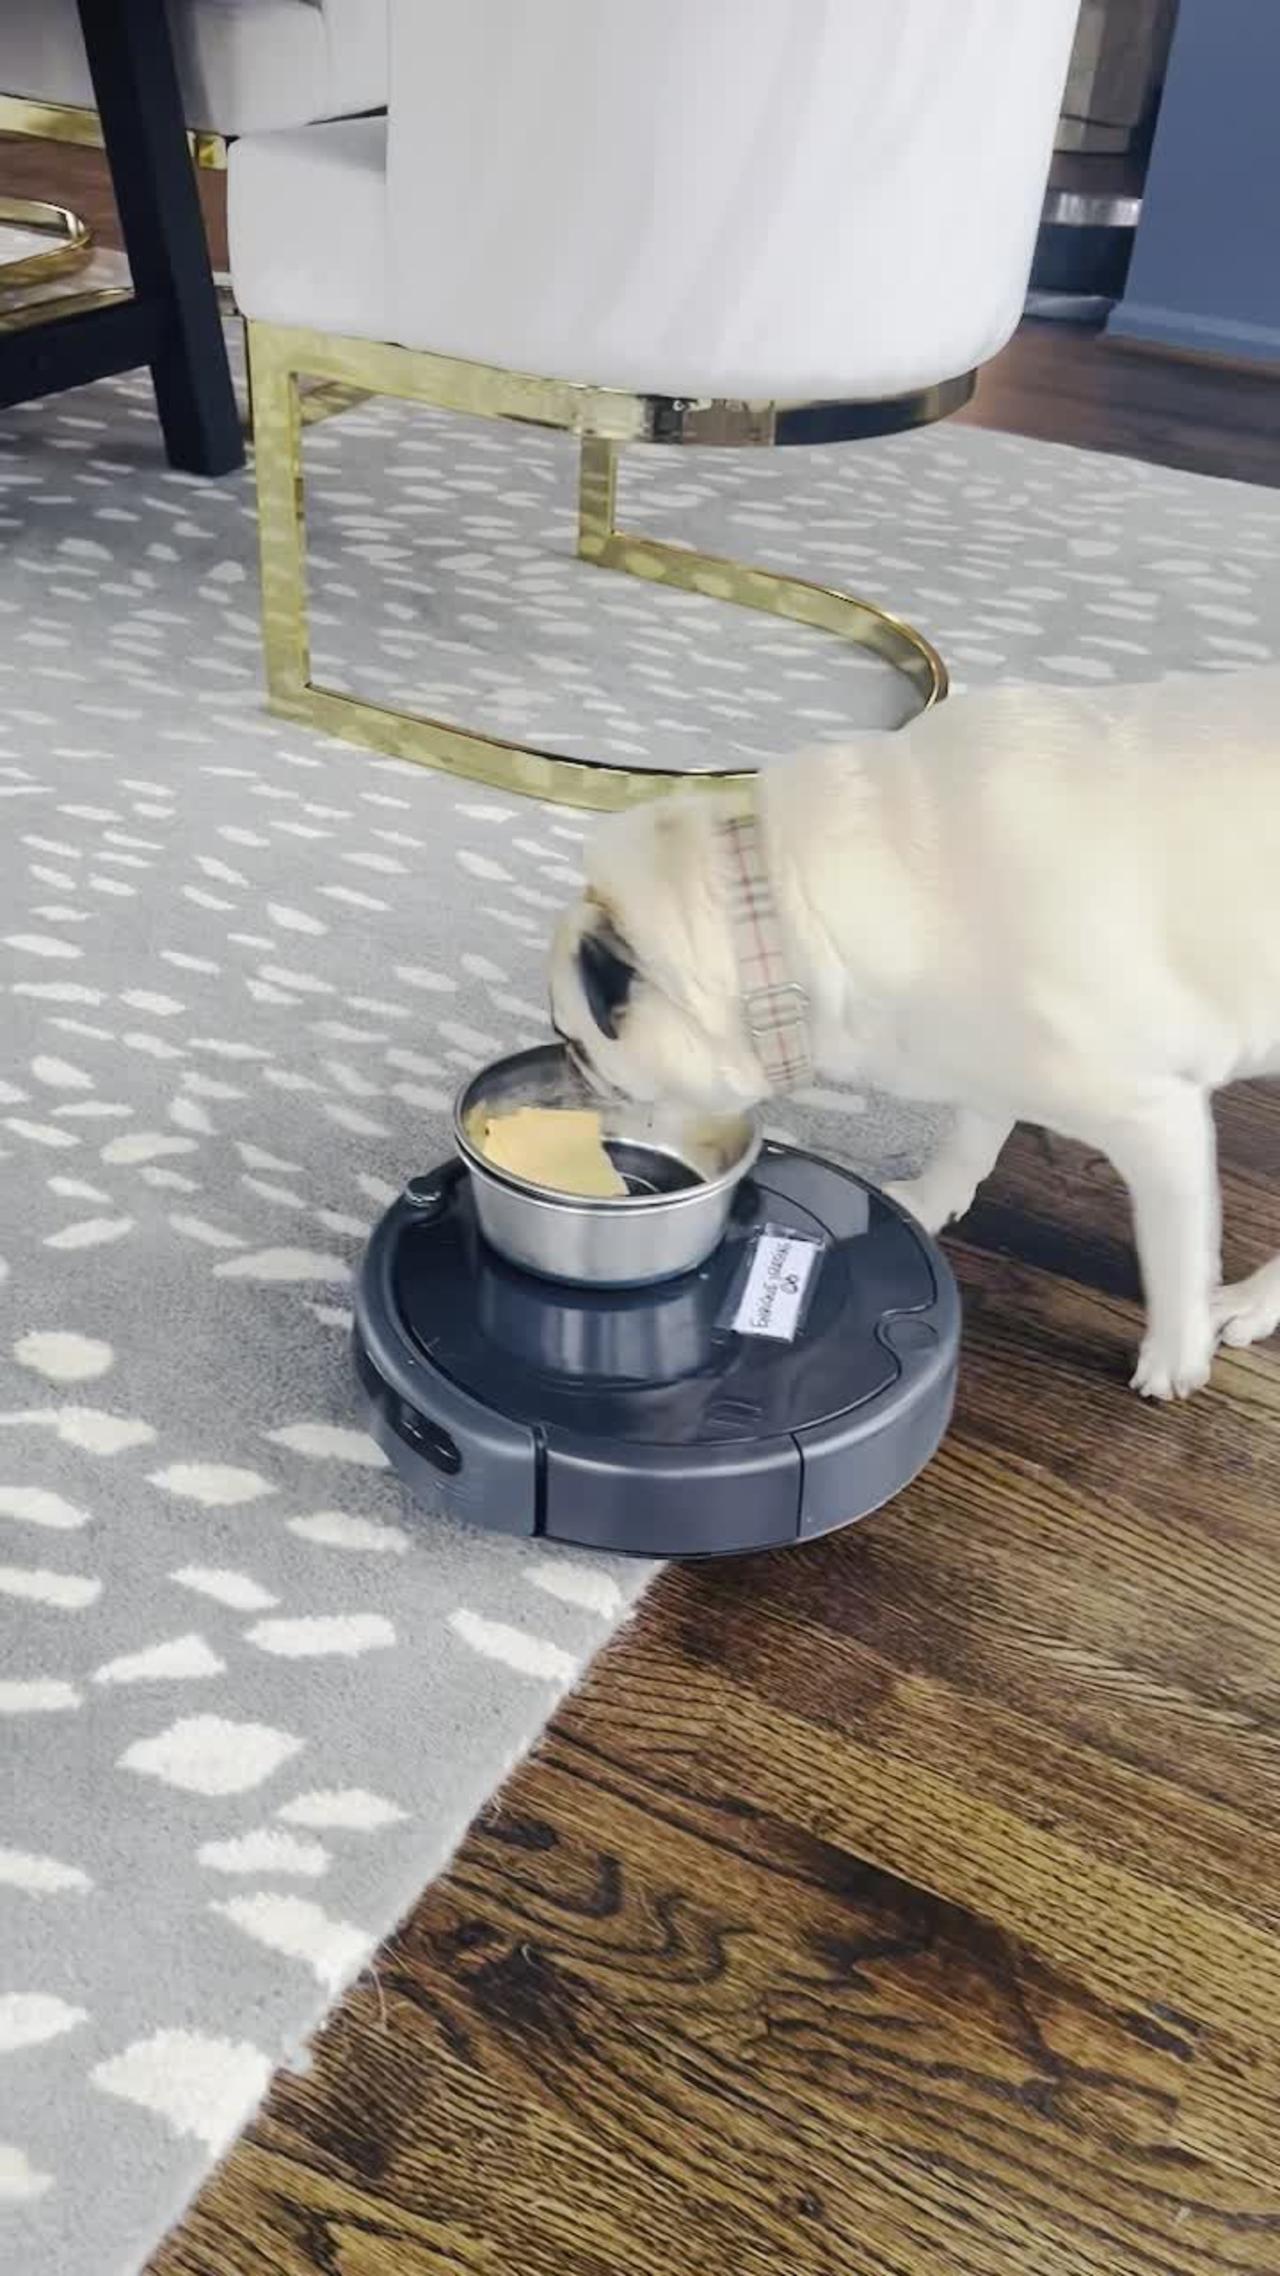 How to Train Your Dog to Not to Be Afraid of the Roomba